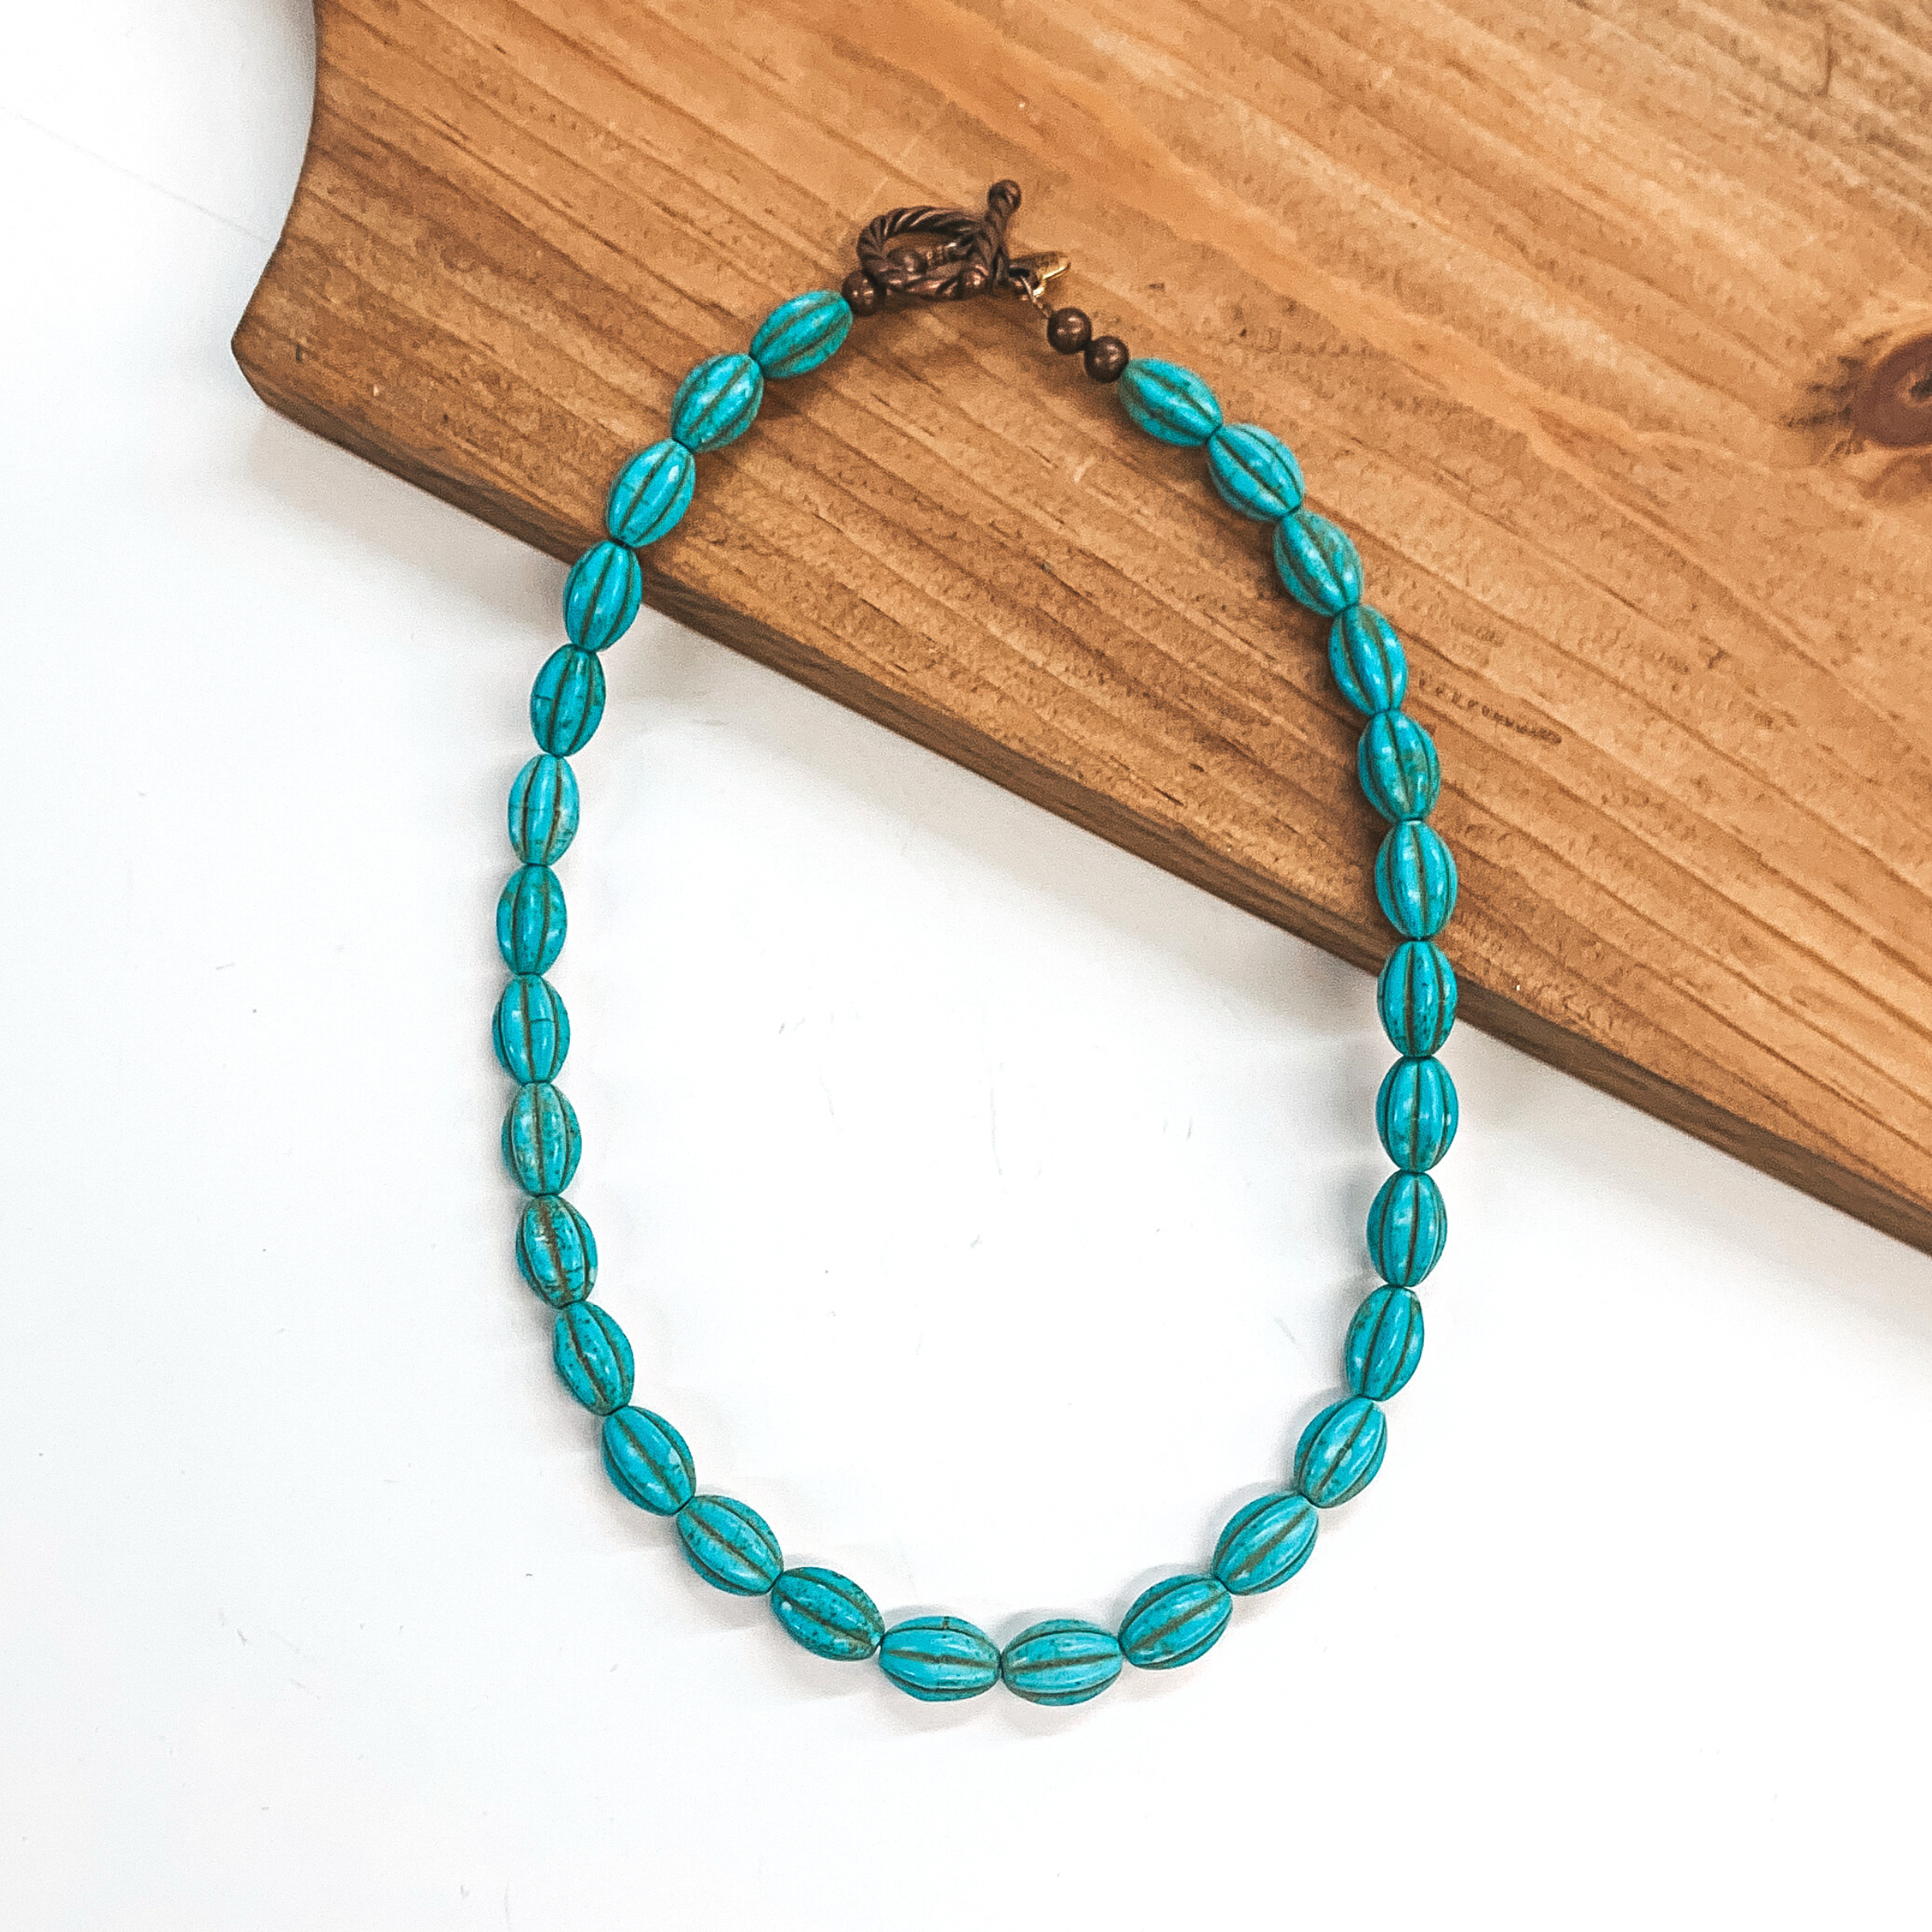 Turquoise beaded necklace with a copper toggle clasp.  This necklace is pictured partially laying on a brown necklace board and  on a white background.